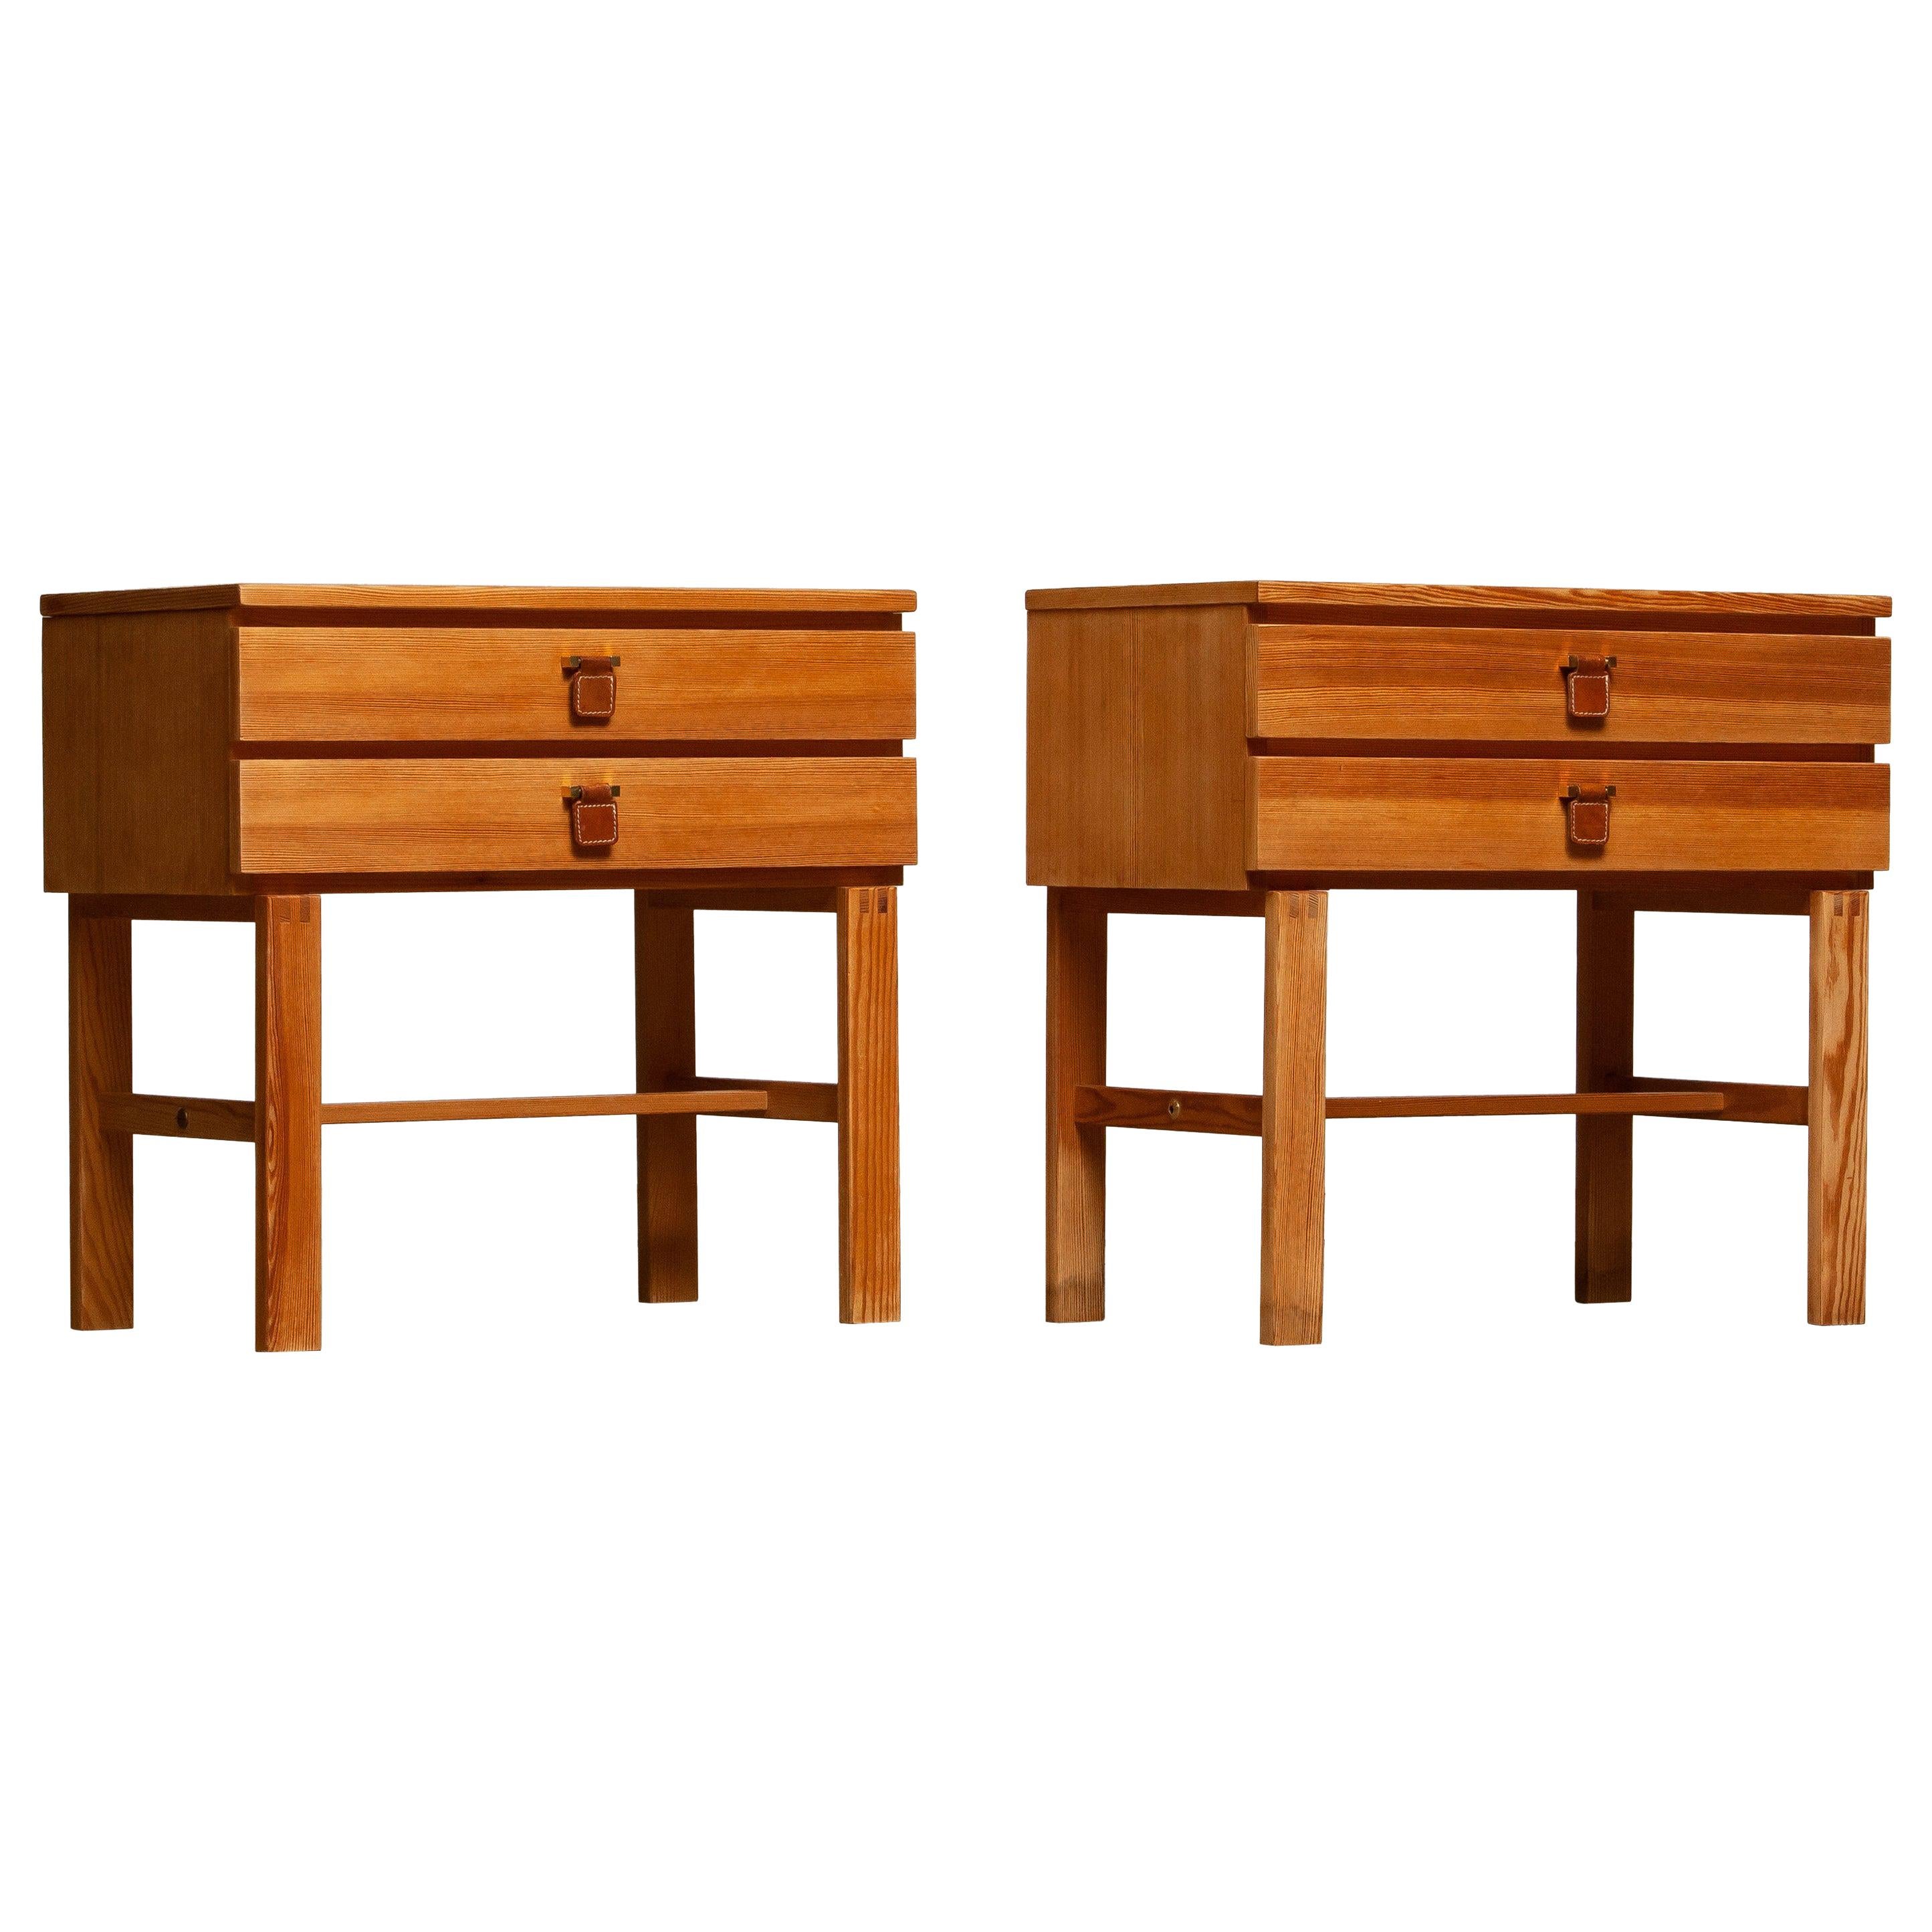 1970s, Pair of Nightstands or Bedside Tables in Pine by Sigurd Göransson, Sweden